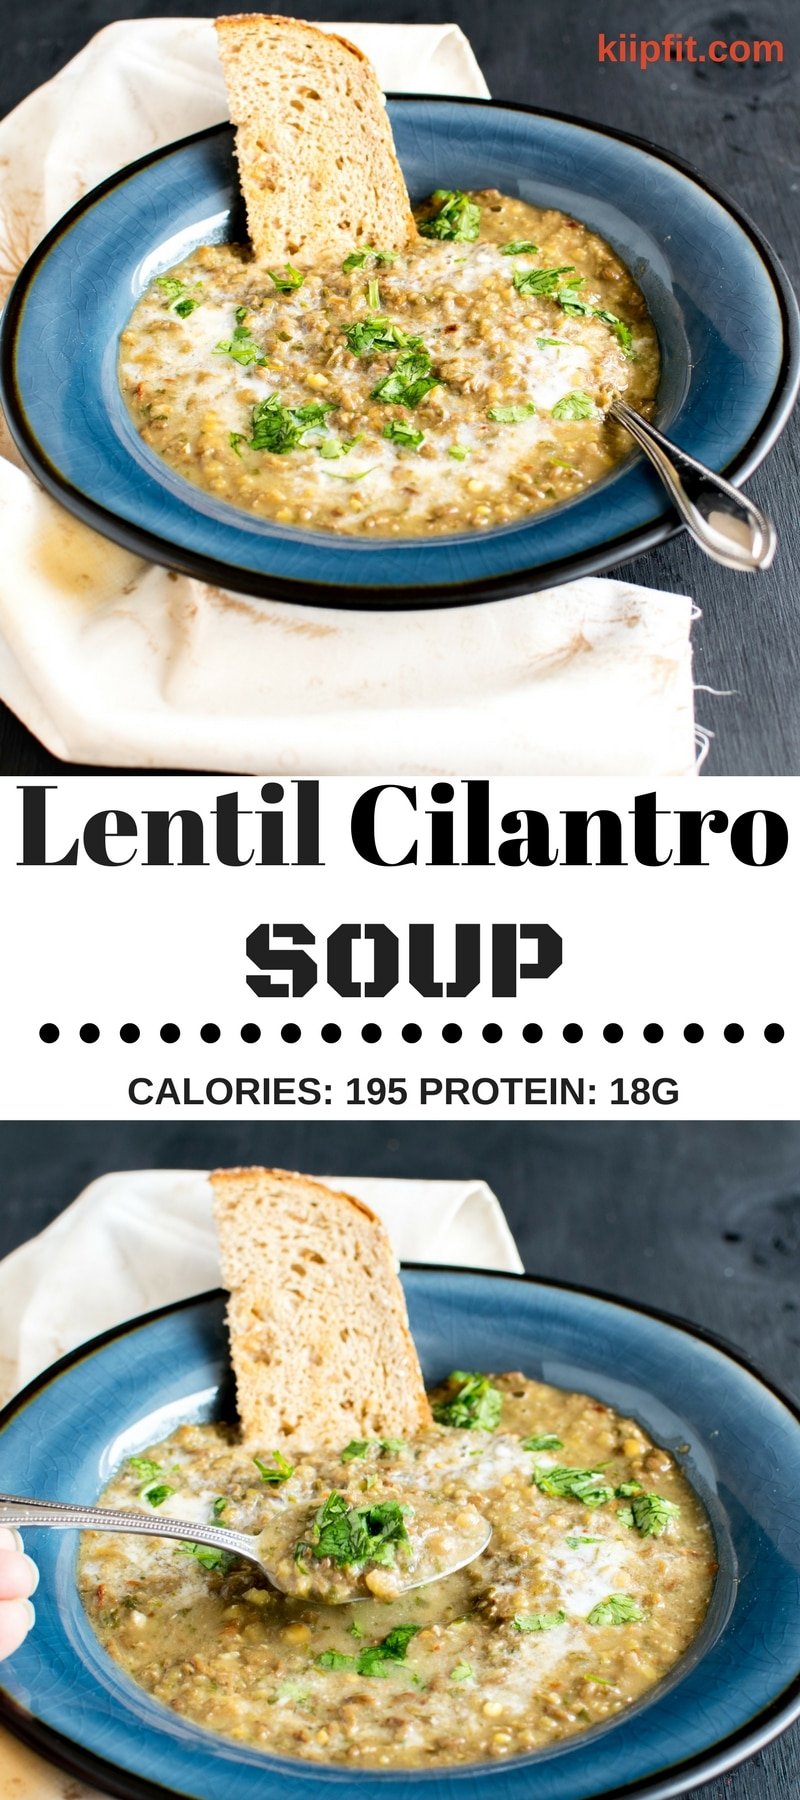 Lentil Cilantro Soup This soup is  loaded with protein, good fats, good carbohydrates and lots of vitamins and minerals. This soup is excellent if you are following high protein and low carb diet with no added sugar. The herbs in this soup provide many medicinal benefits along with lots of deliciousness. Lentil Cilantro Soup is definitely a mouthwatering meal that gets ready in only 30 minutes and is made with super simple ingredients [ vegan + gf ] kiipfit.com